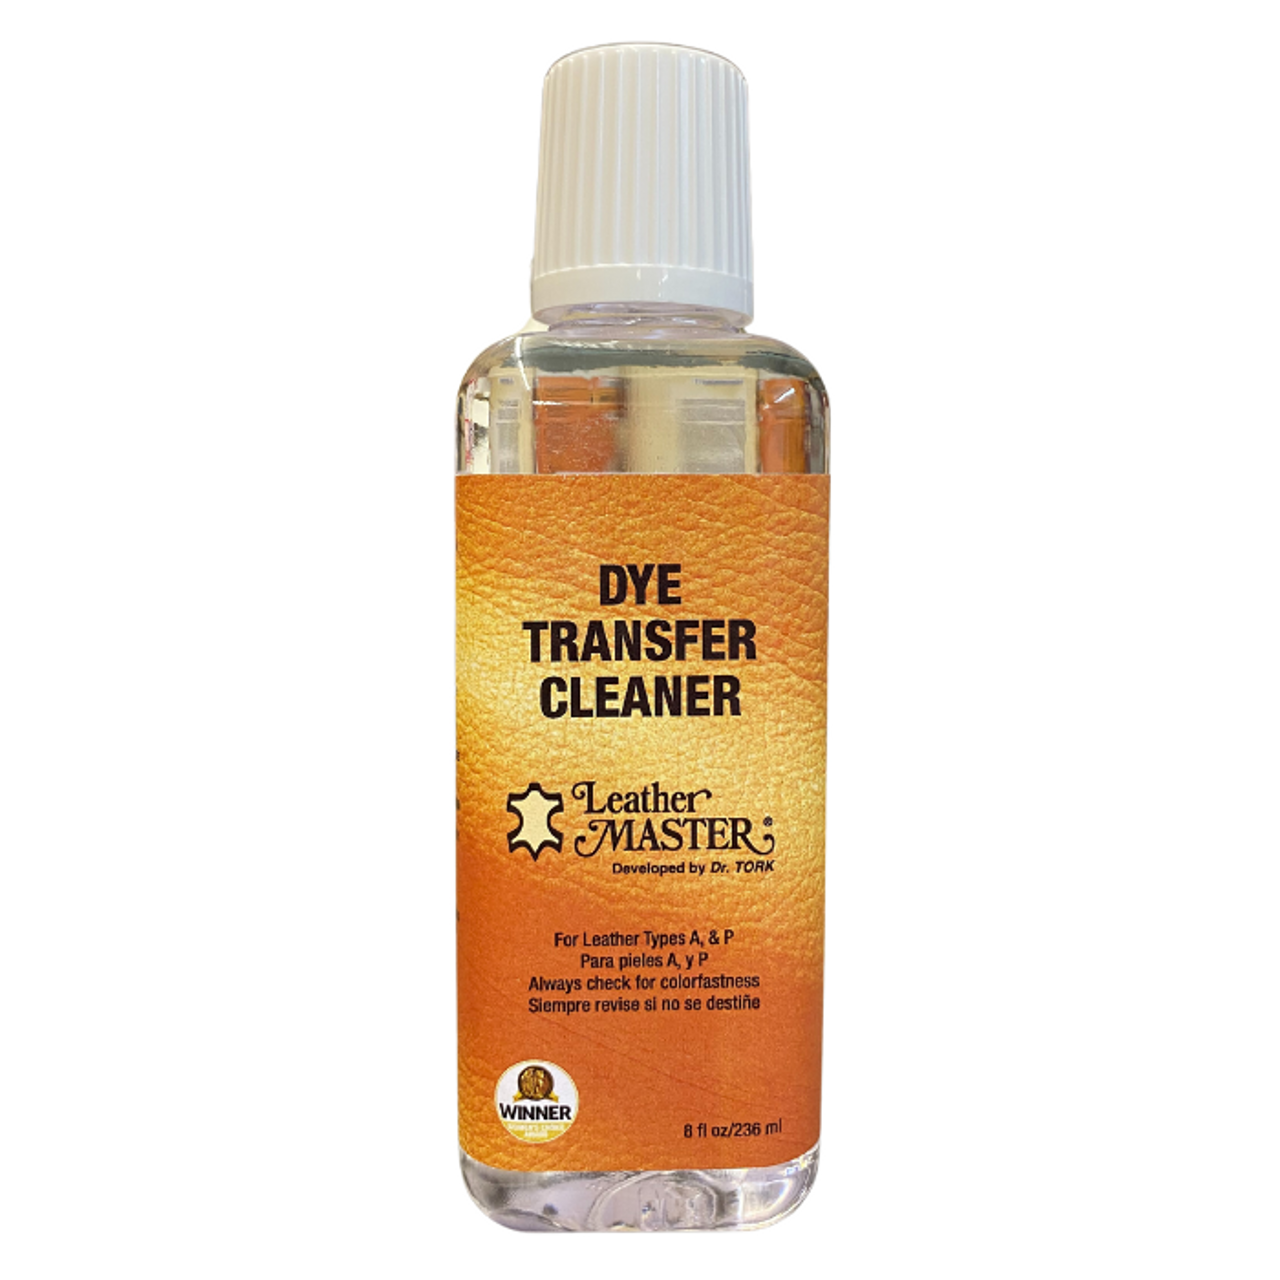 Leather Dye Transfer Cleaner